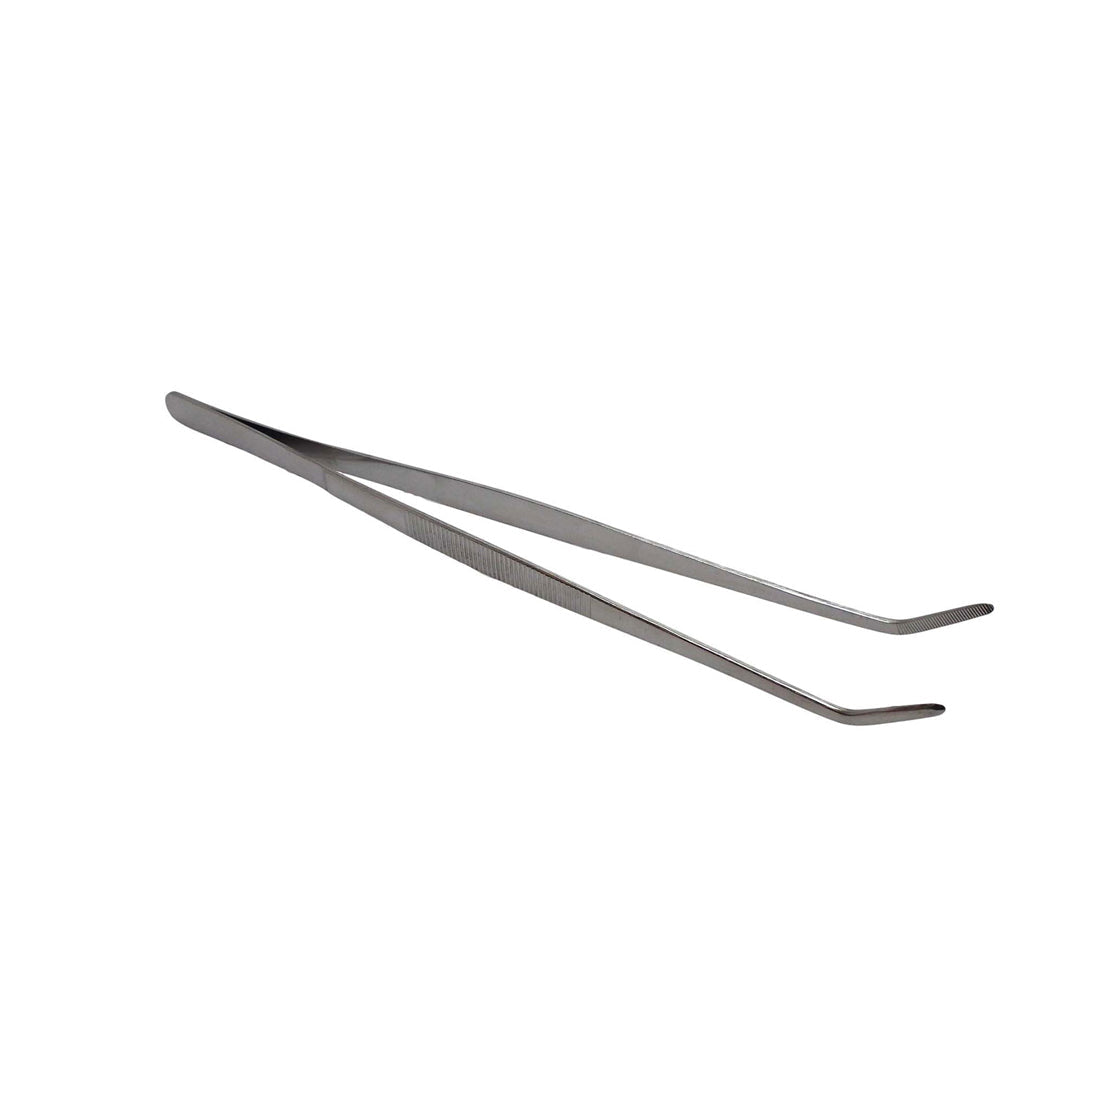 Livefood Stainless Steel Tweezers Curved End 200mm (8") Bulk Buy x24